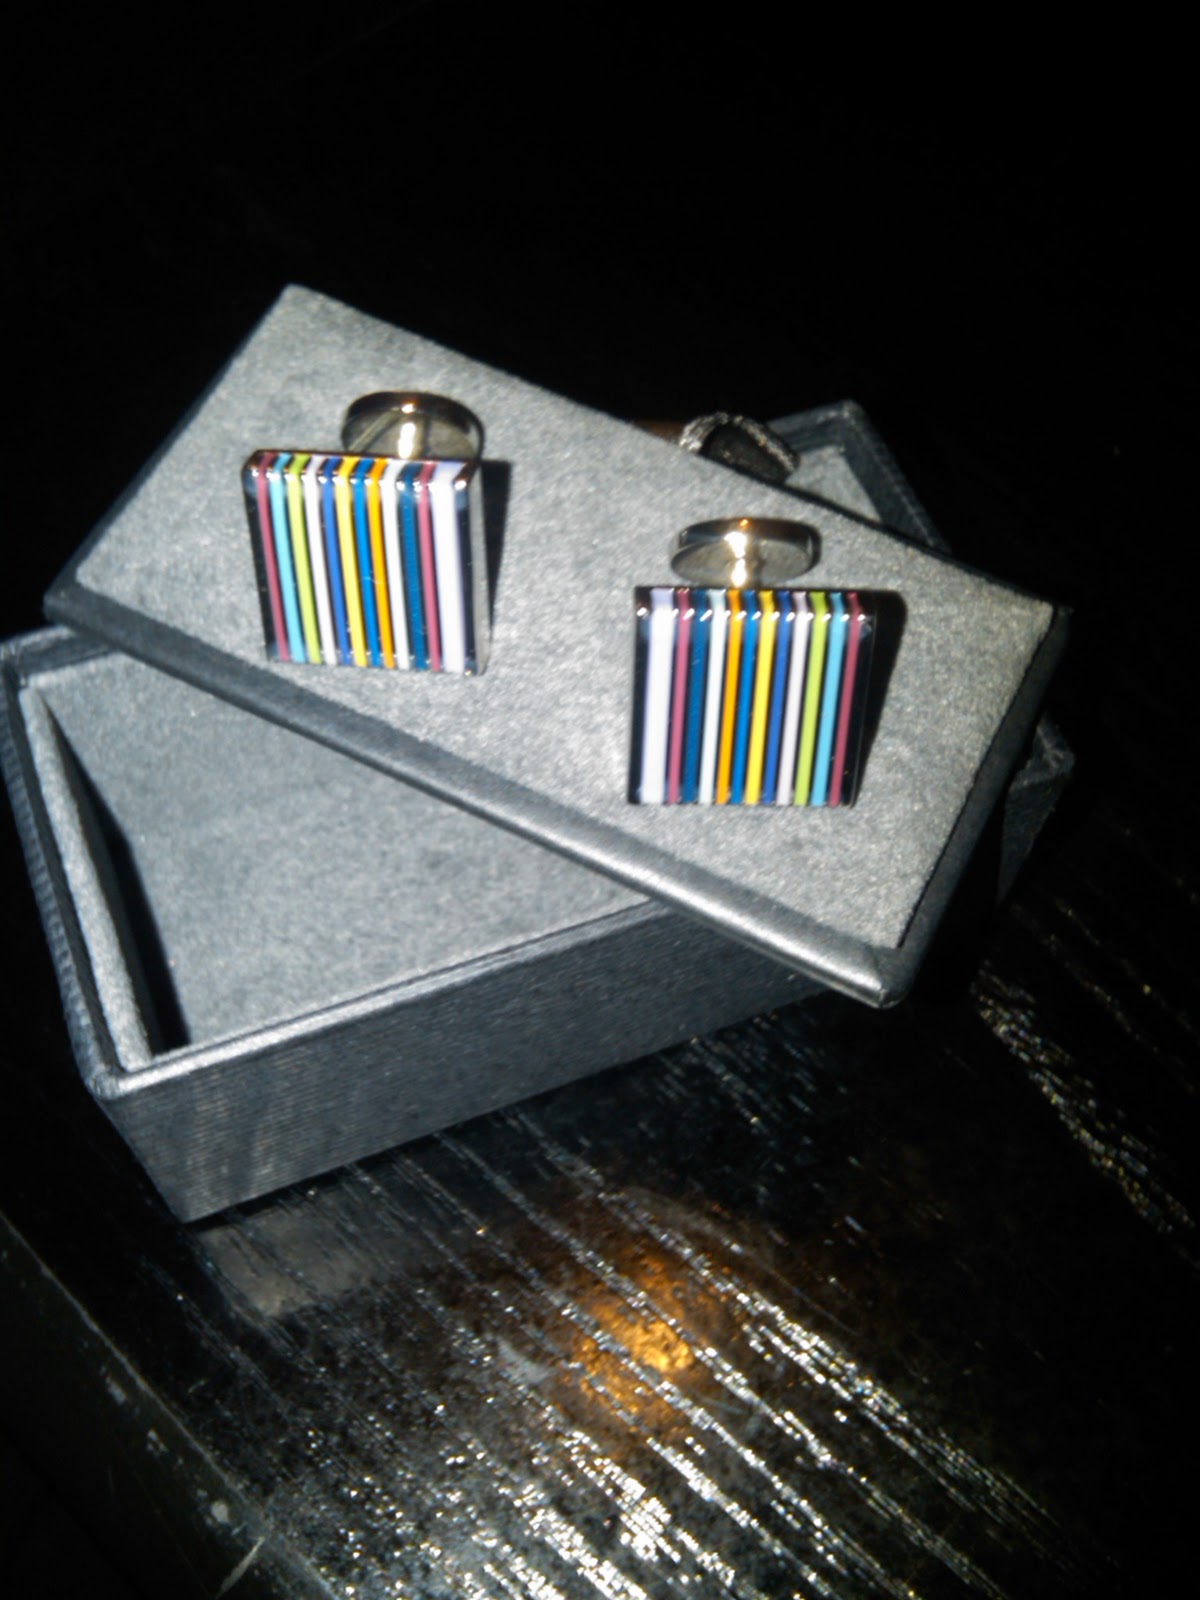 DIARY OF A CLOTHESHORSE: AUSTIN REED "CUFFLINKS" GIVE AWAY